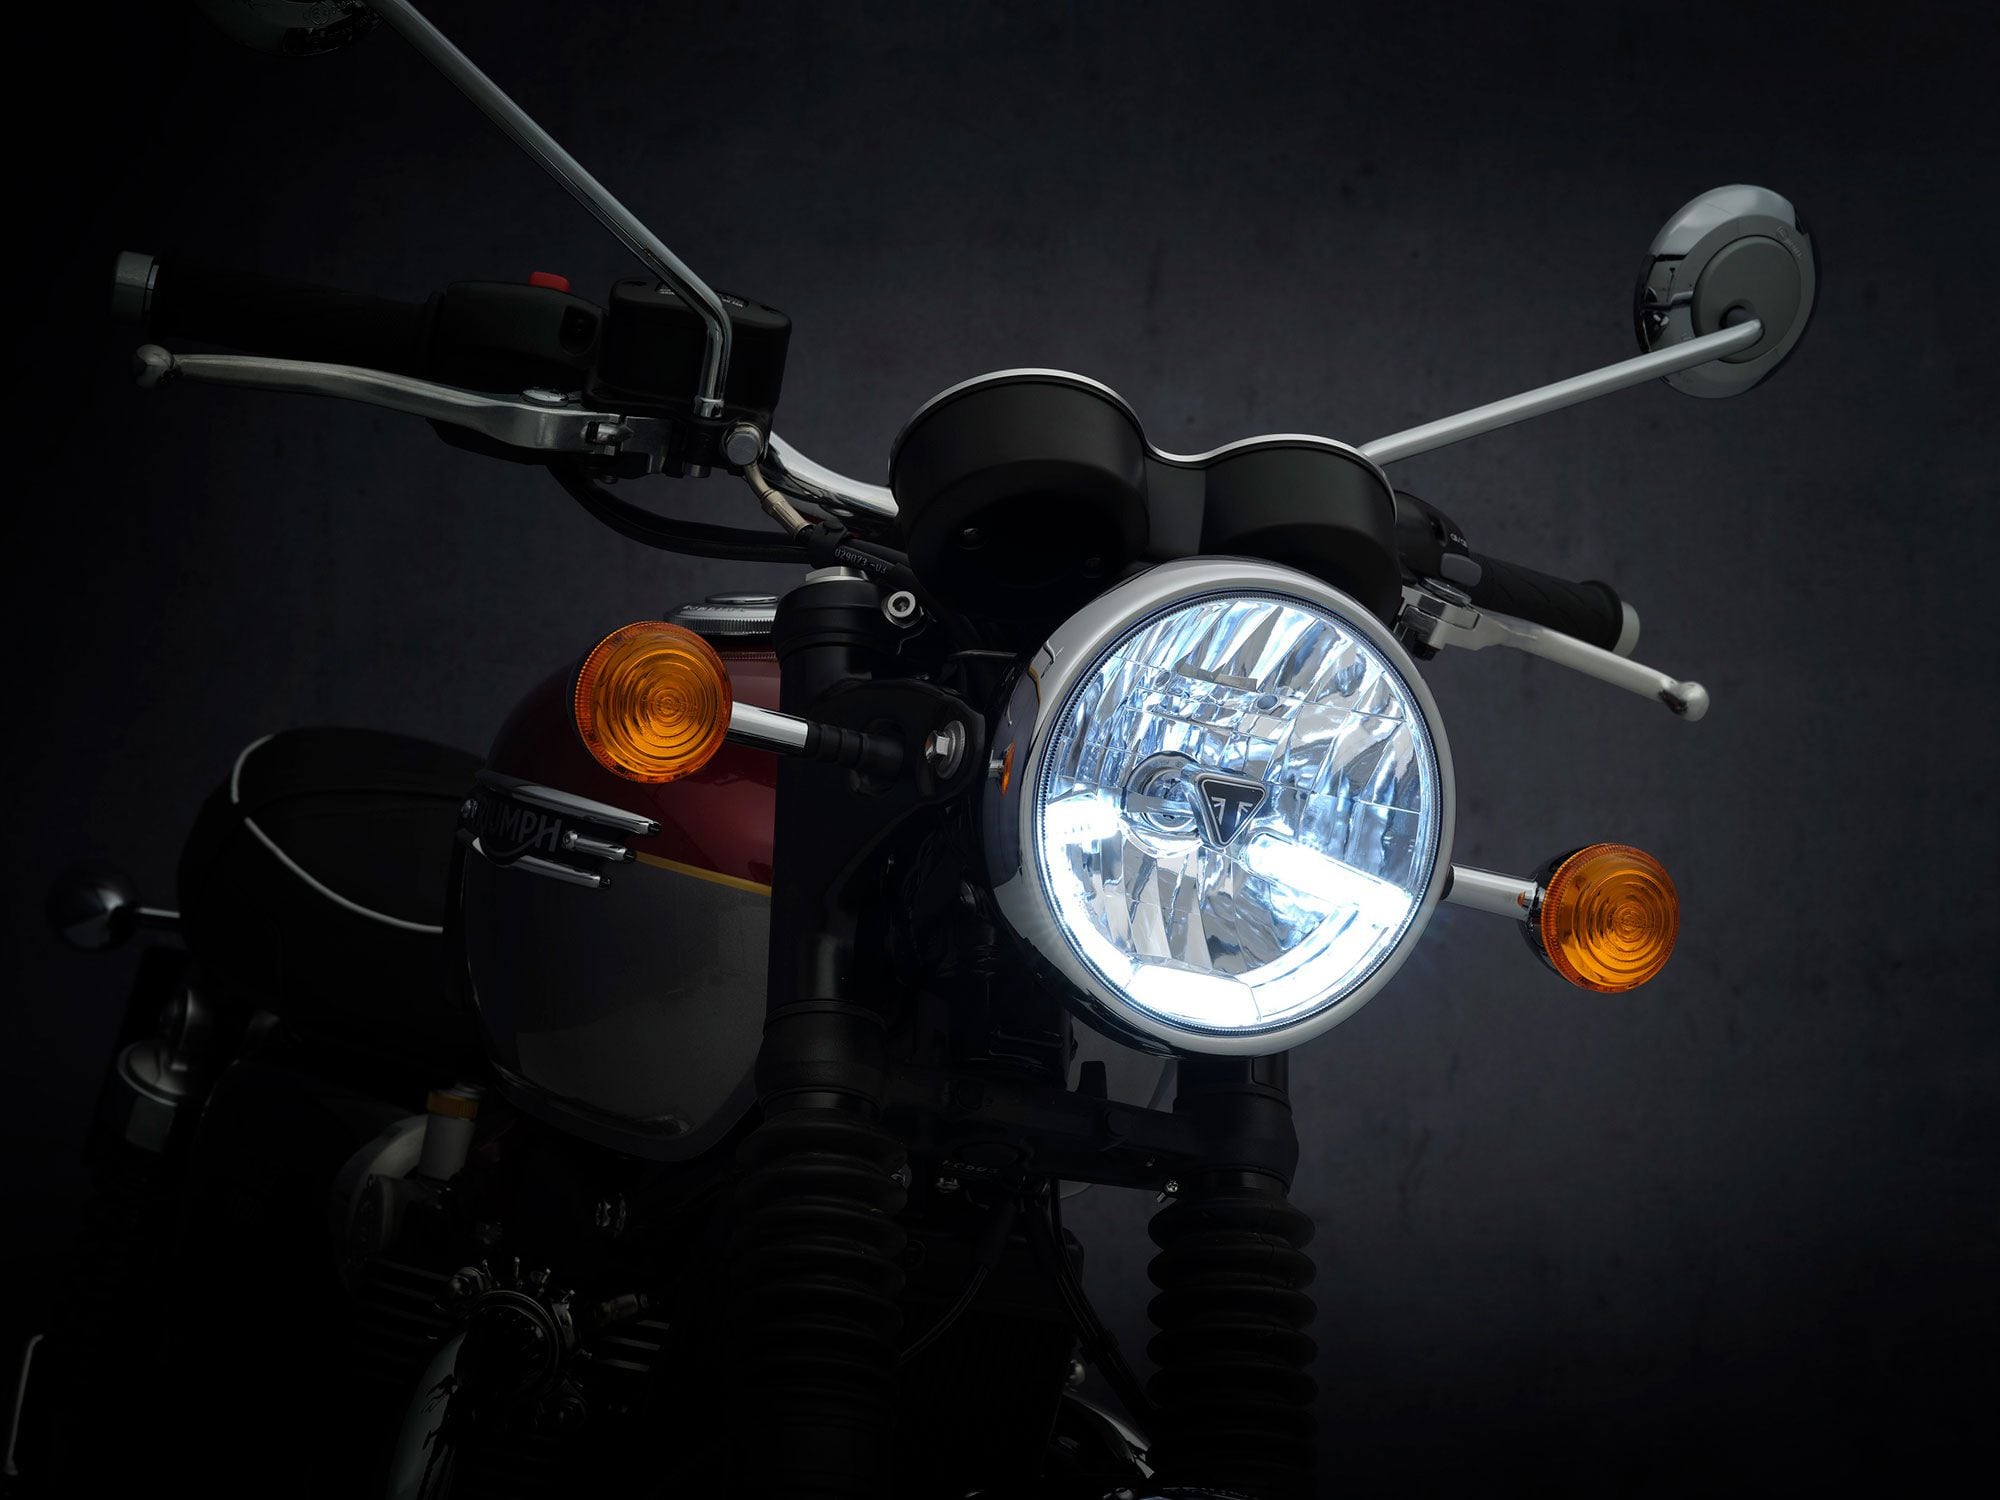 Full LED headlights, some with DRL, are featured on most of the new 2022 Bonneville range.